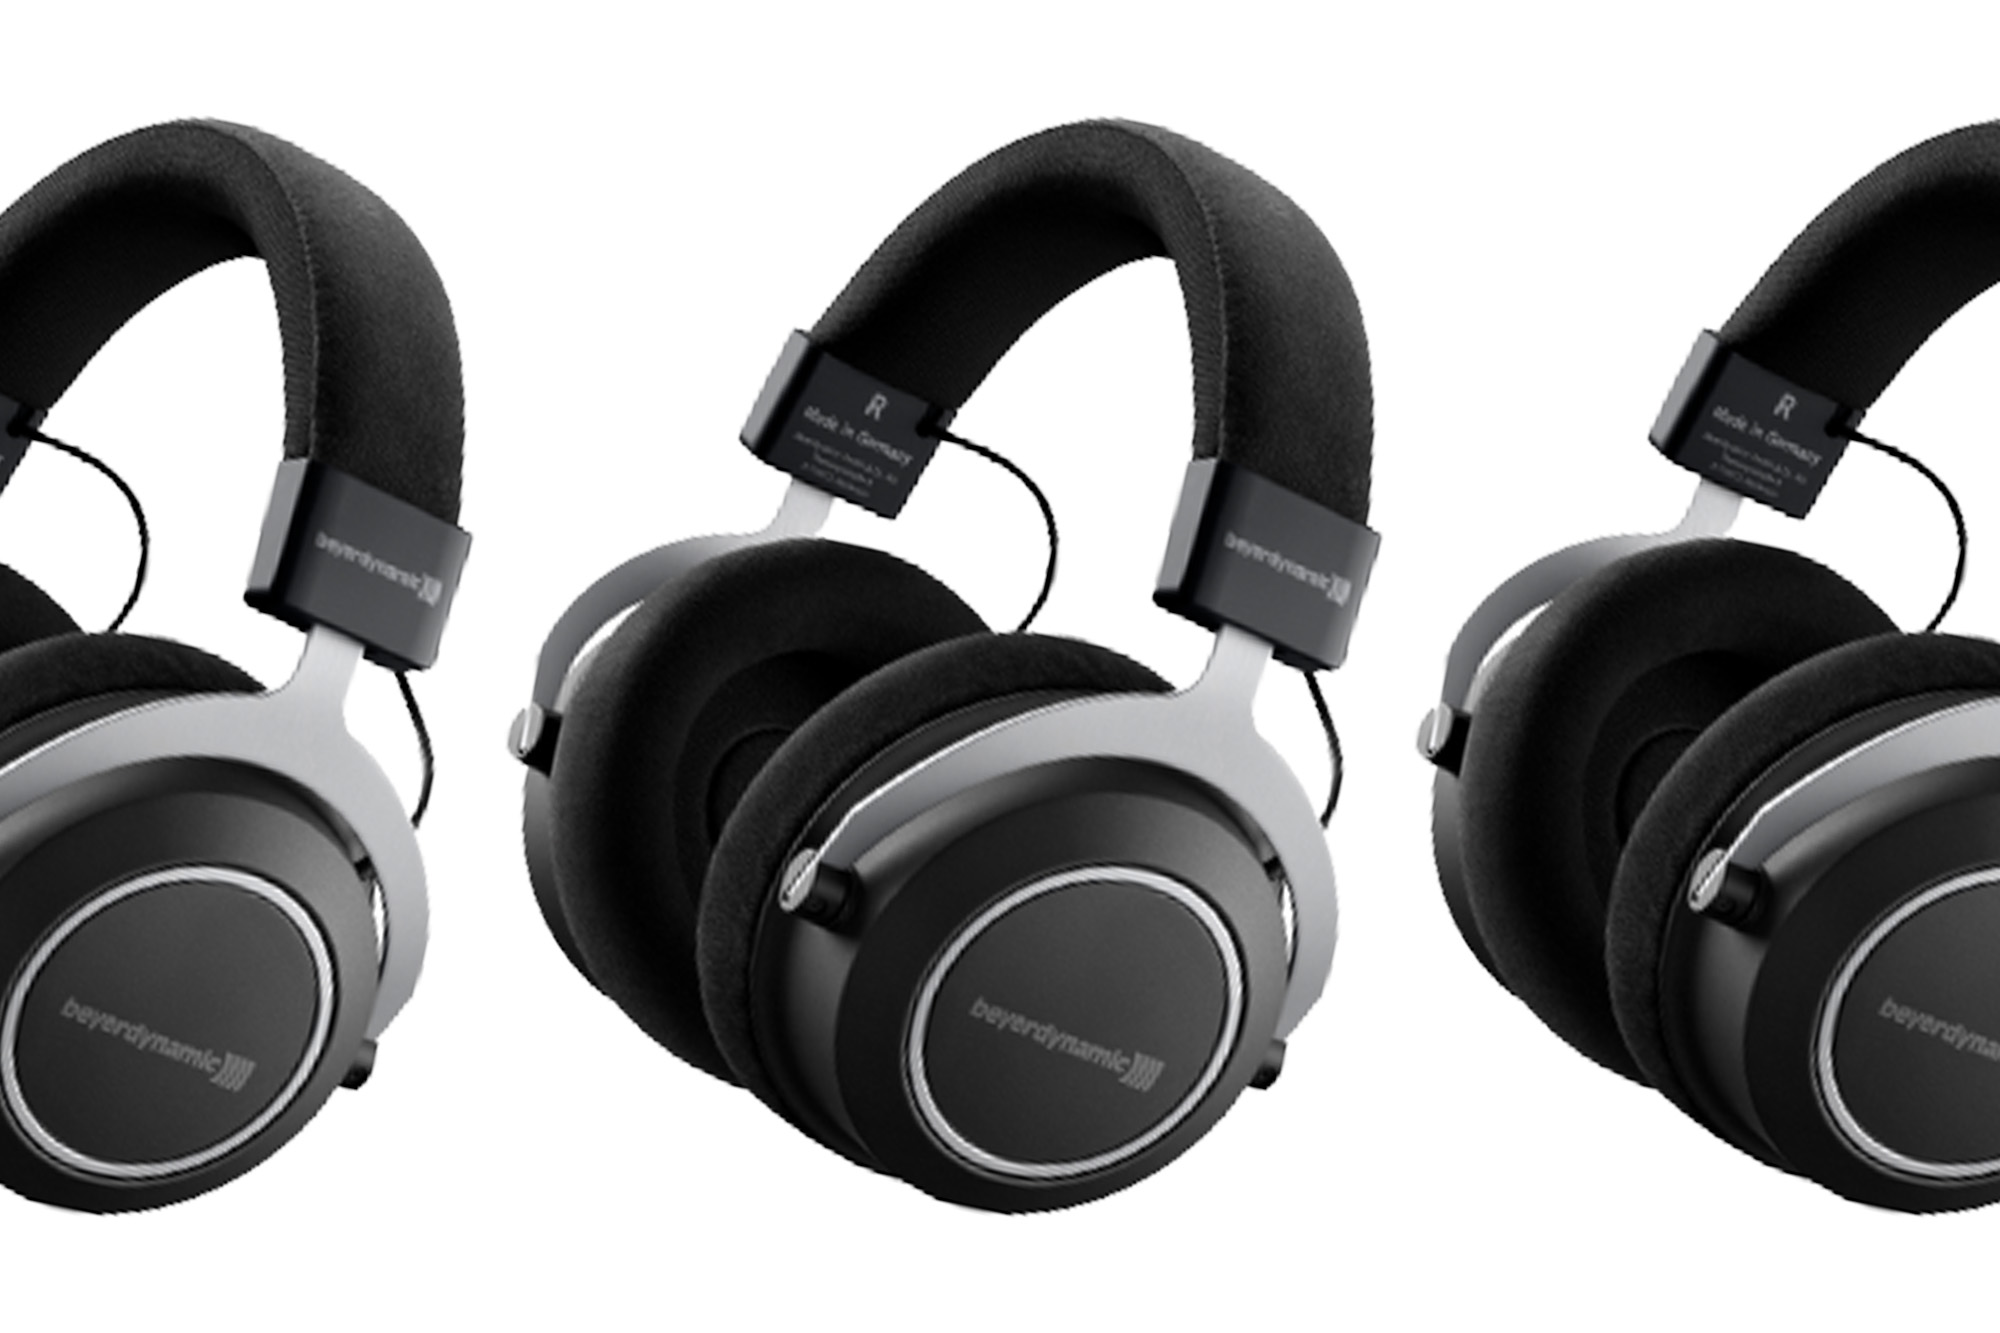 A pair of beyerdynamic Amiron Wireless headphones against a white background